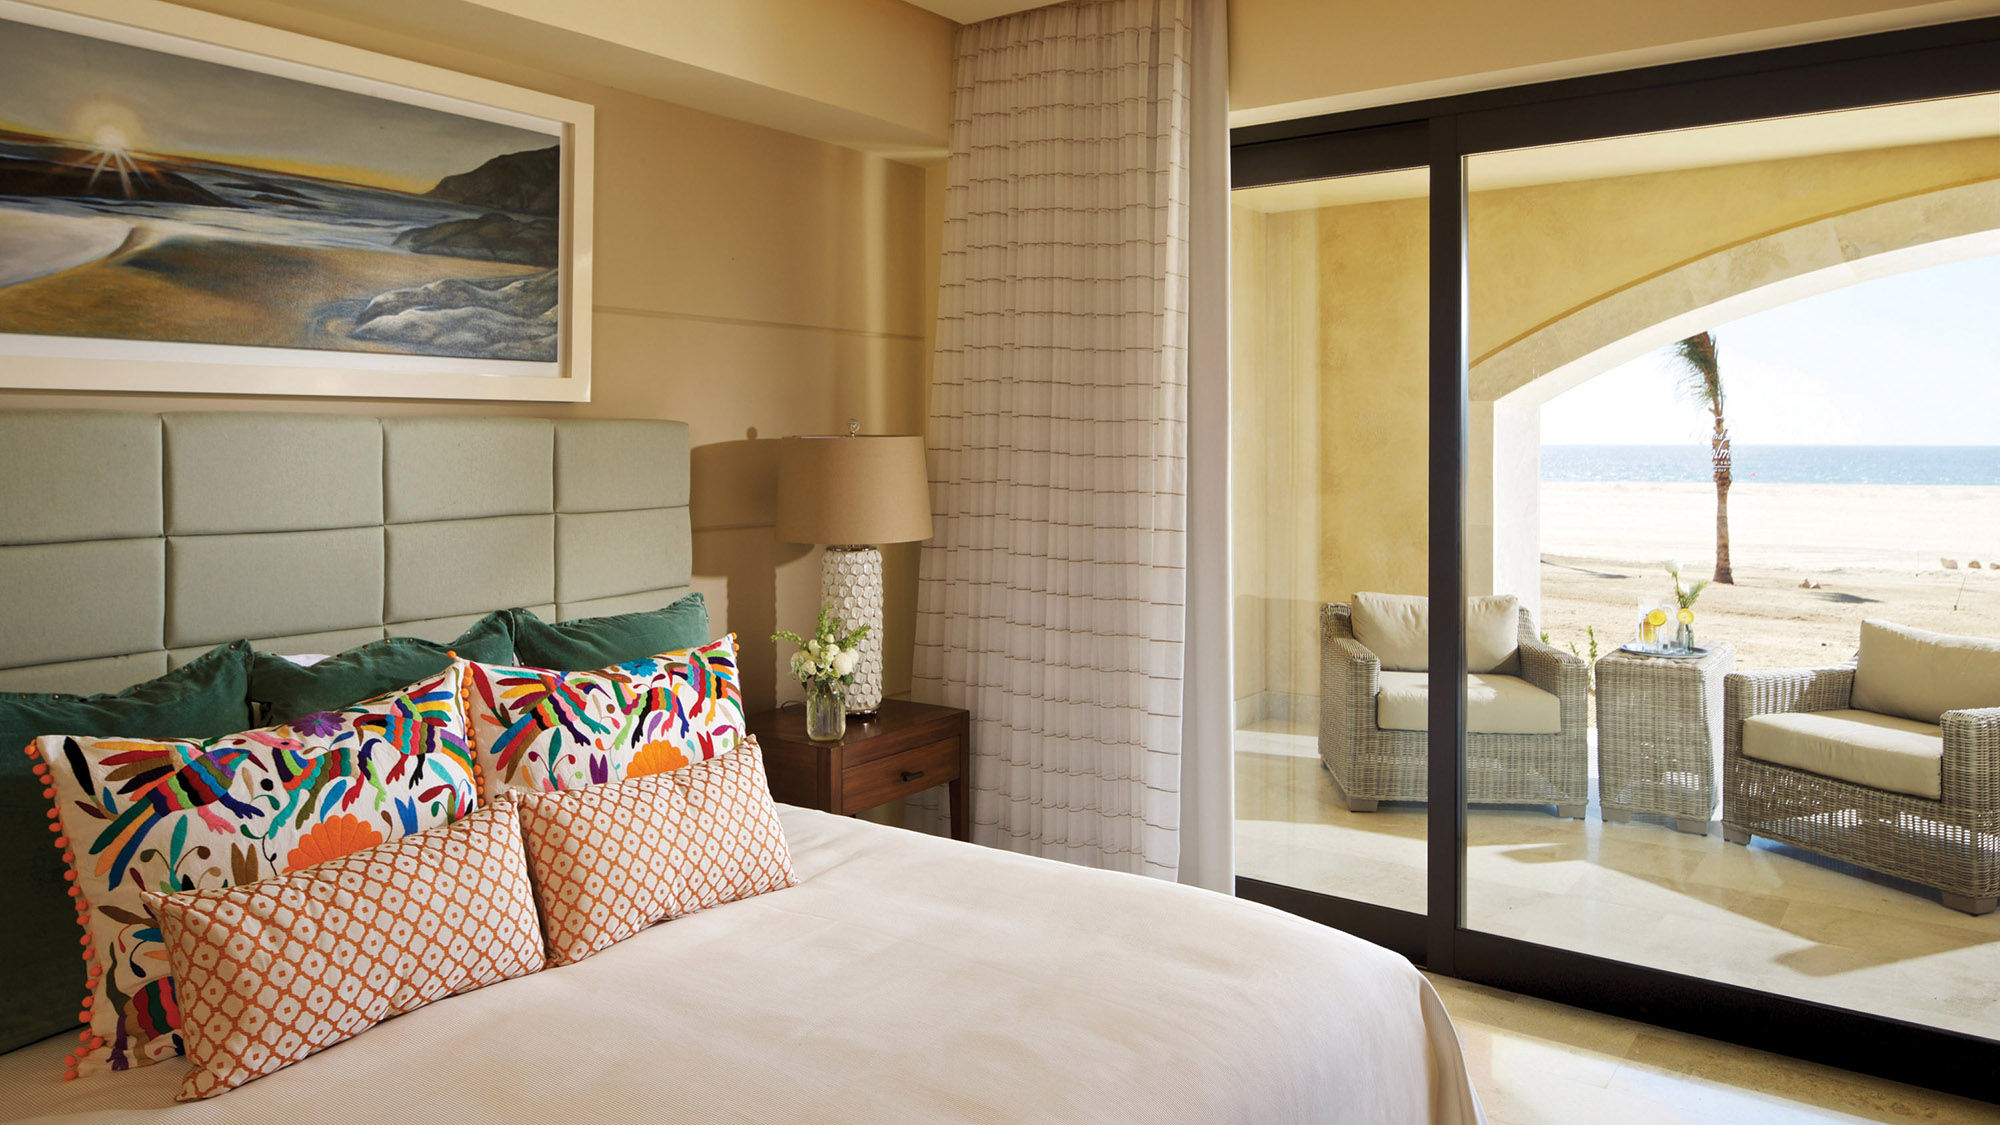 A Master Suite accommodation, one of three room categories at the Los Cabos resort.